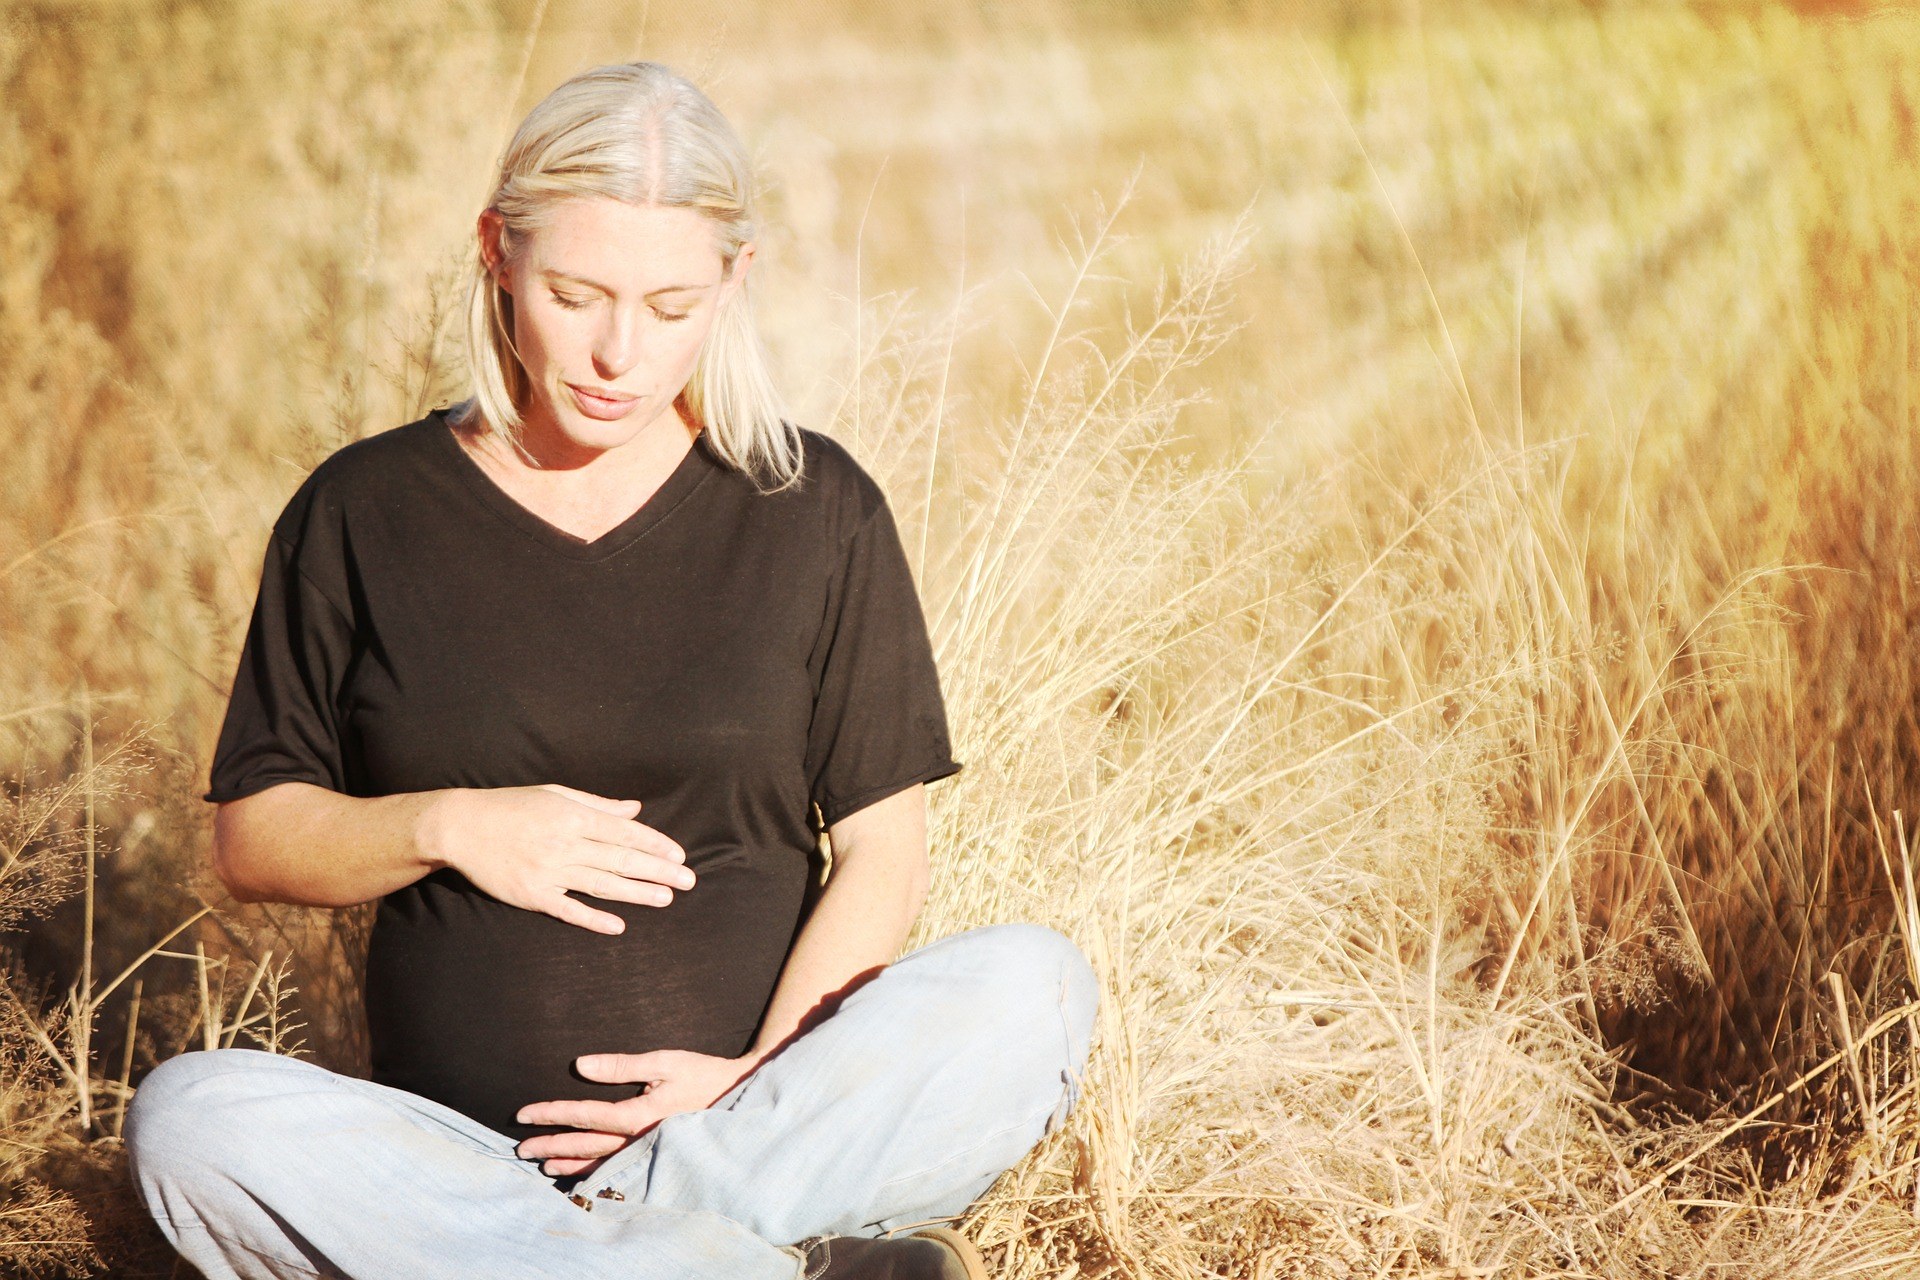 Cramping While Pregnant: Causes and Tips for Relief